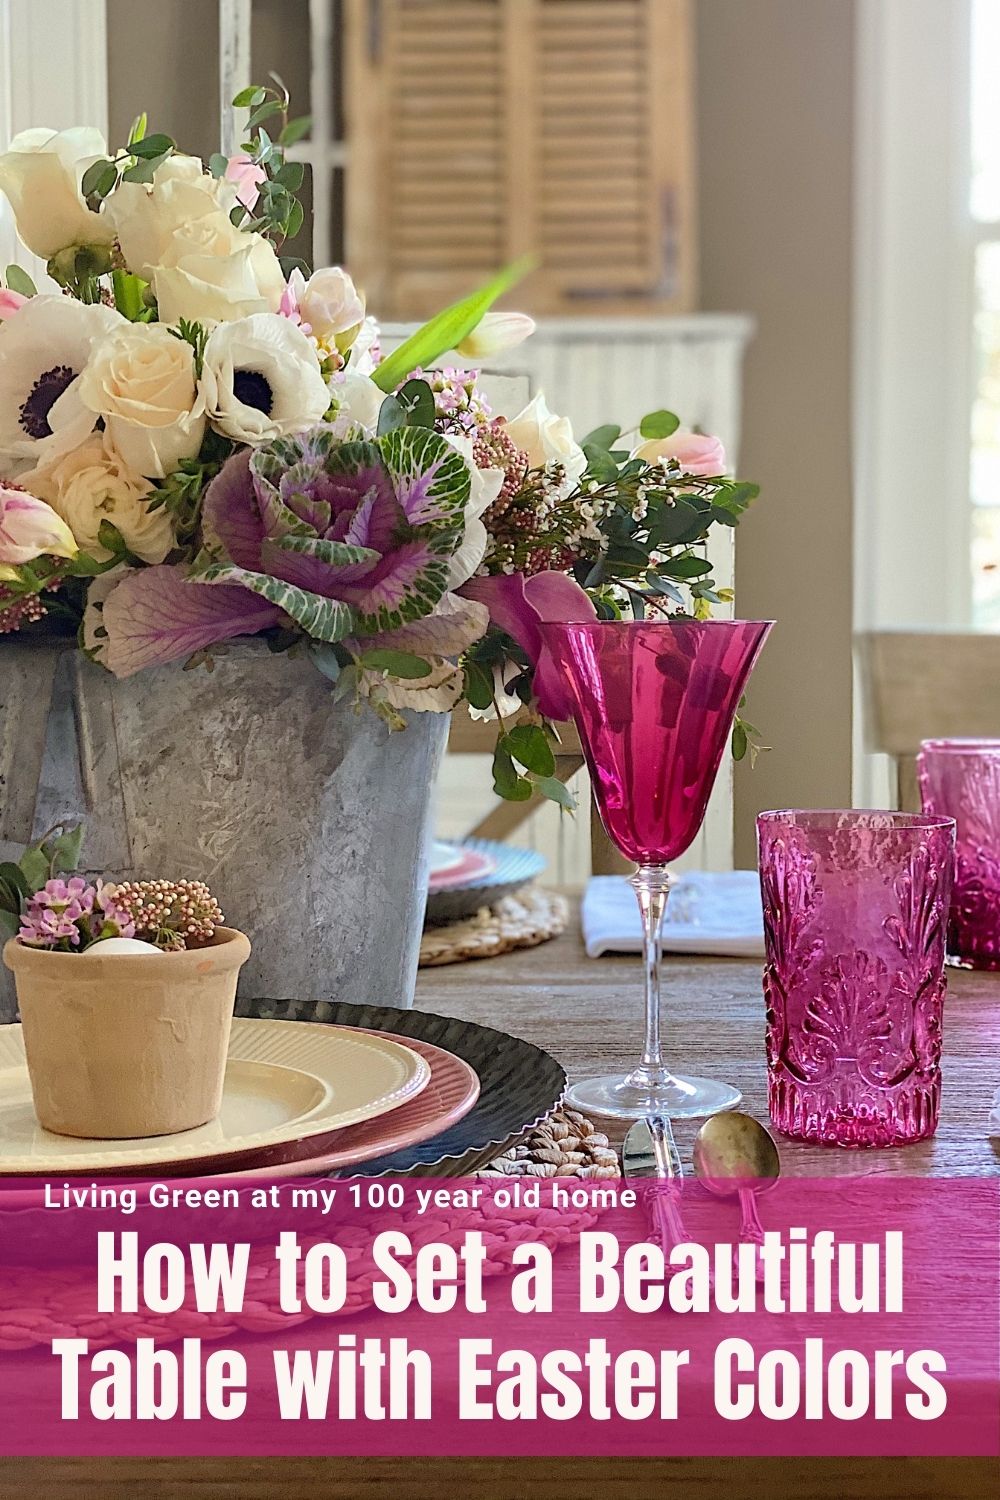 I am so excited to share my Easter ideas for my Easter brunch table. I love the bright Easter colors, and can't wait to share the florals, table setting and fun glassware.